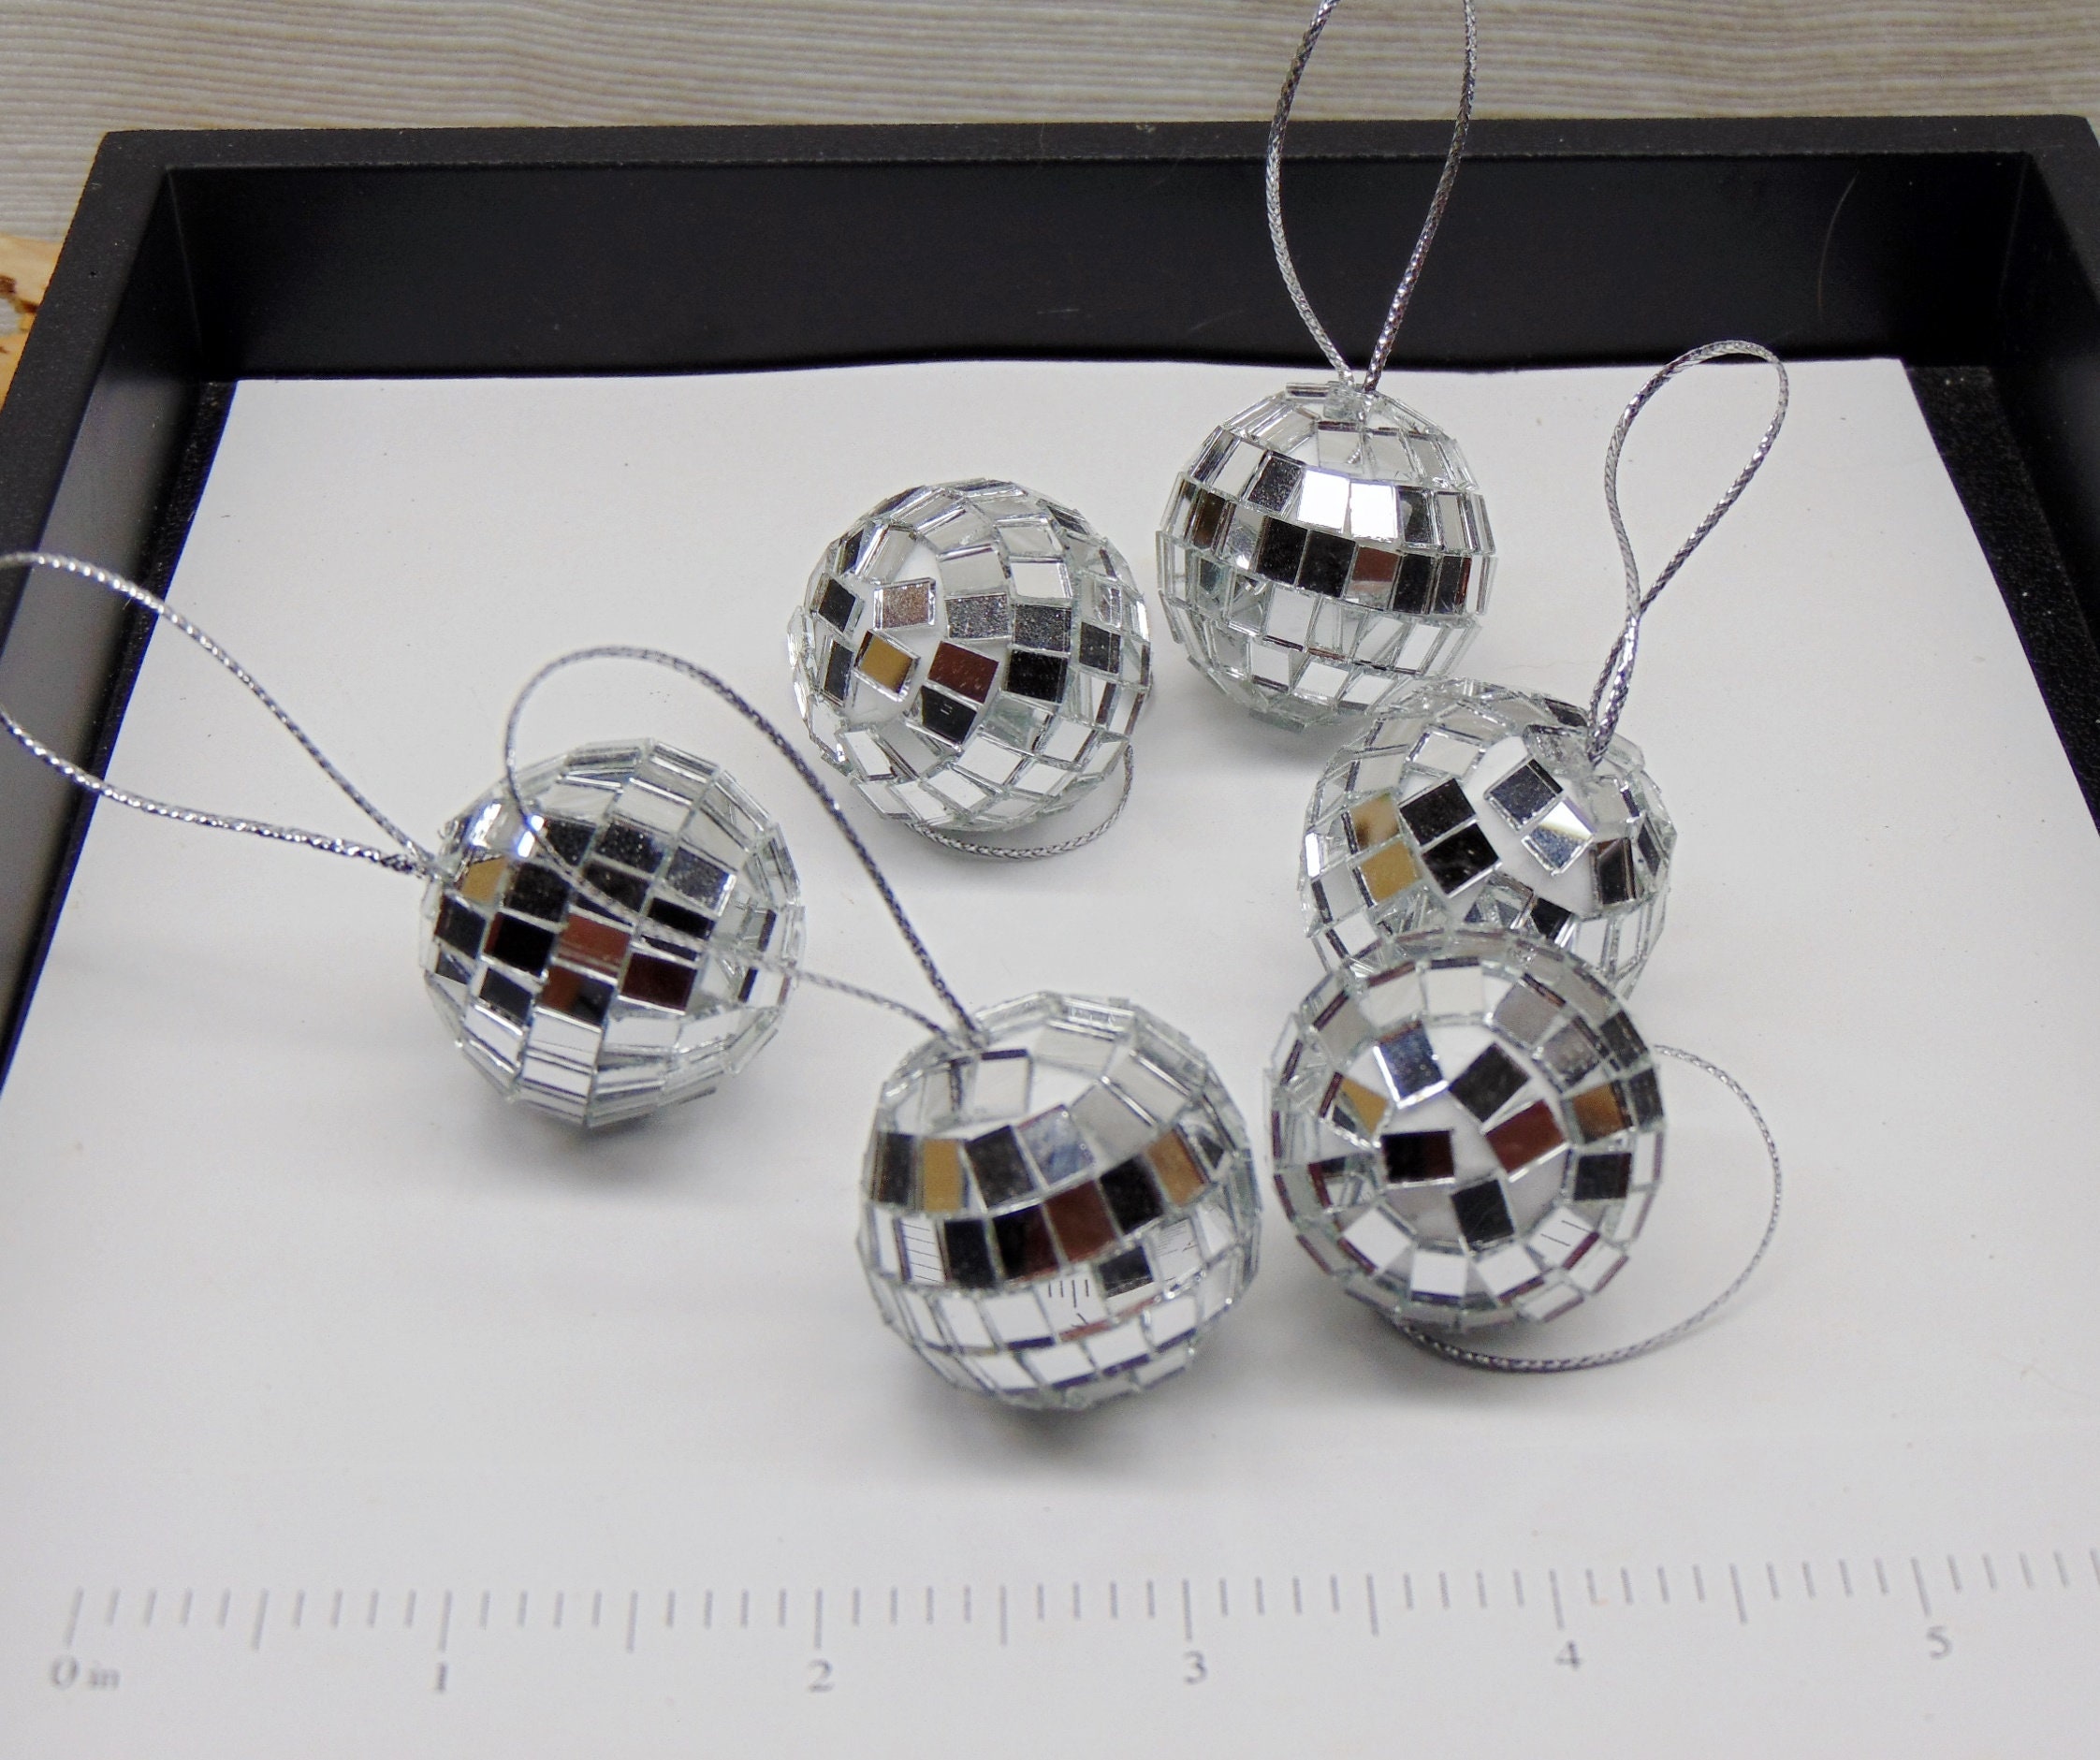 Disco Ball 4 MULTI COLOR Mirror Tiles with Ornament Top, great for  Christmas